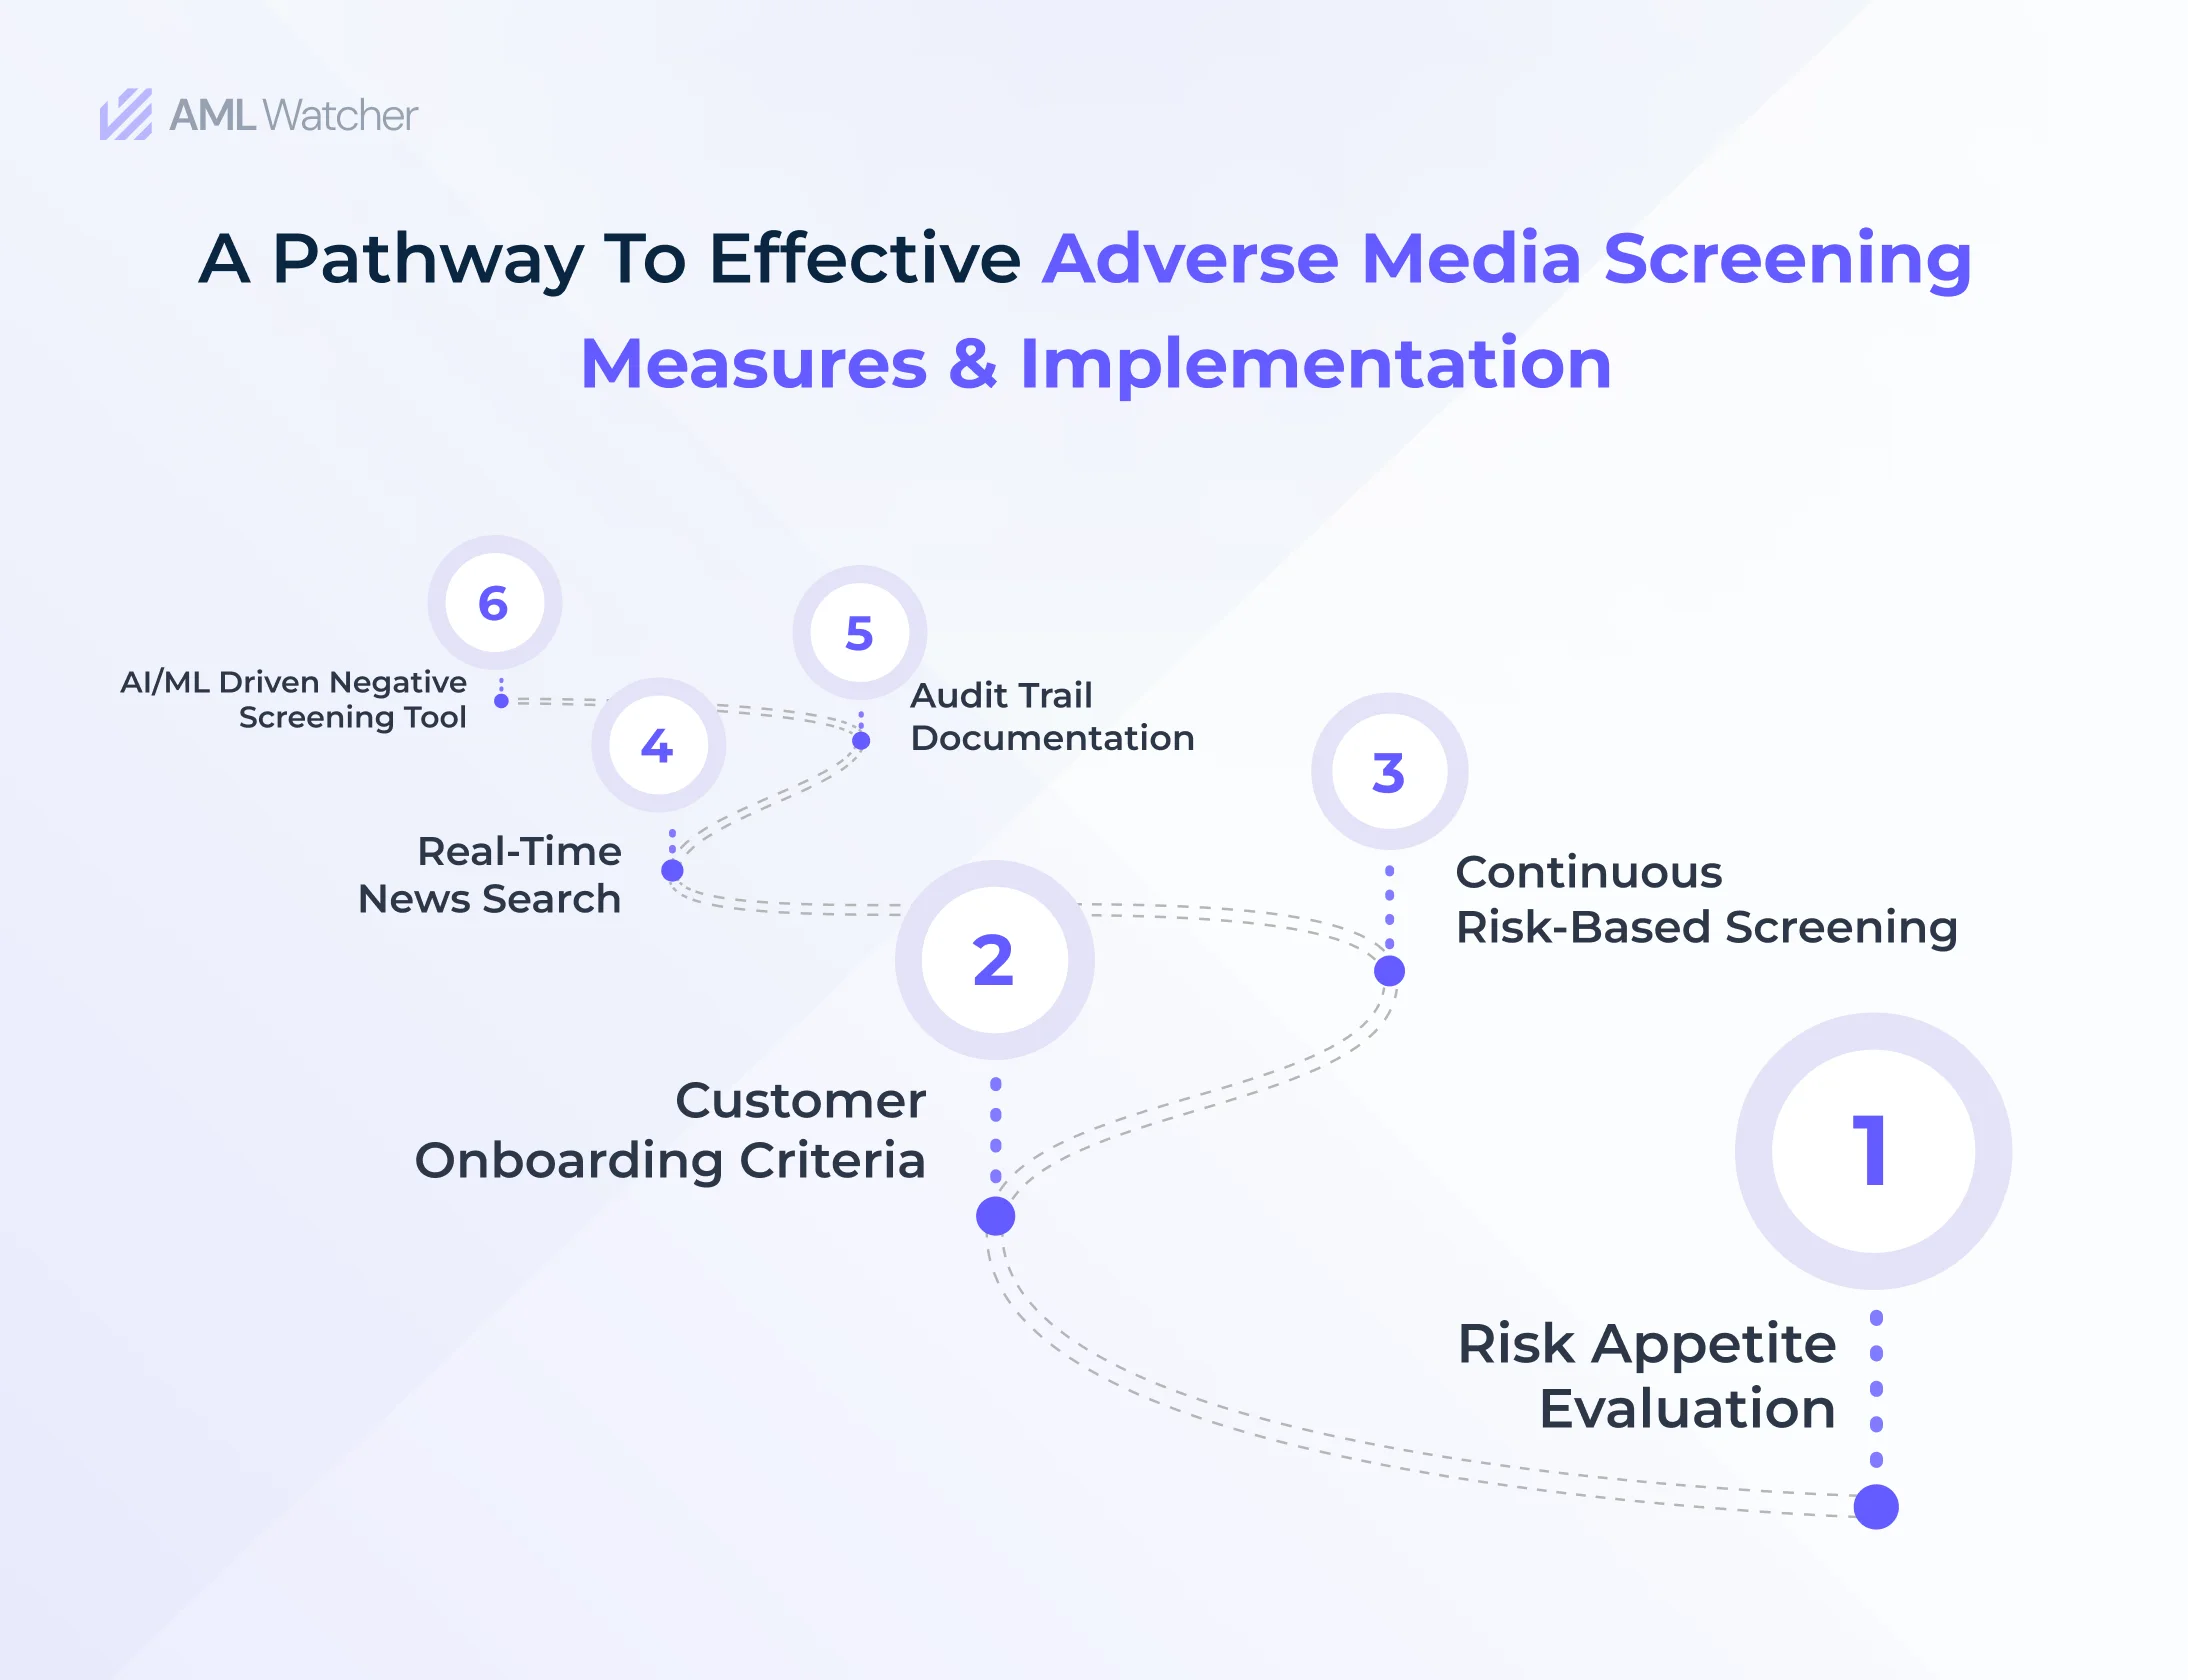 A brief visual representation of adverse screening guidelines and measures motivated by the FATF guidelines.